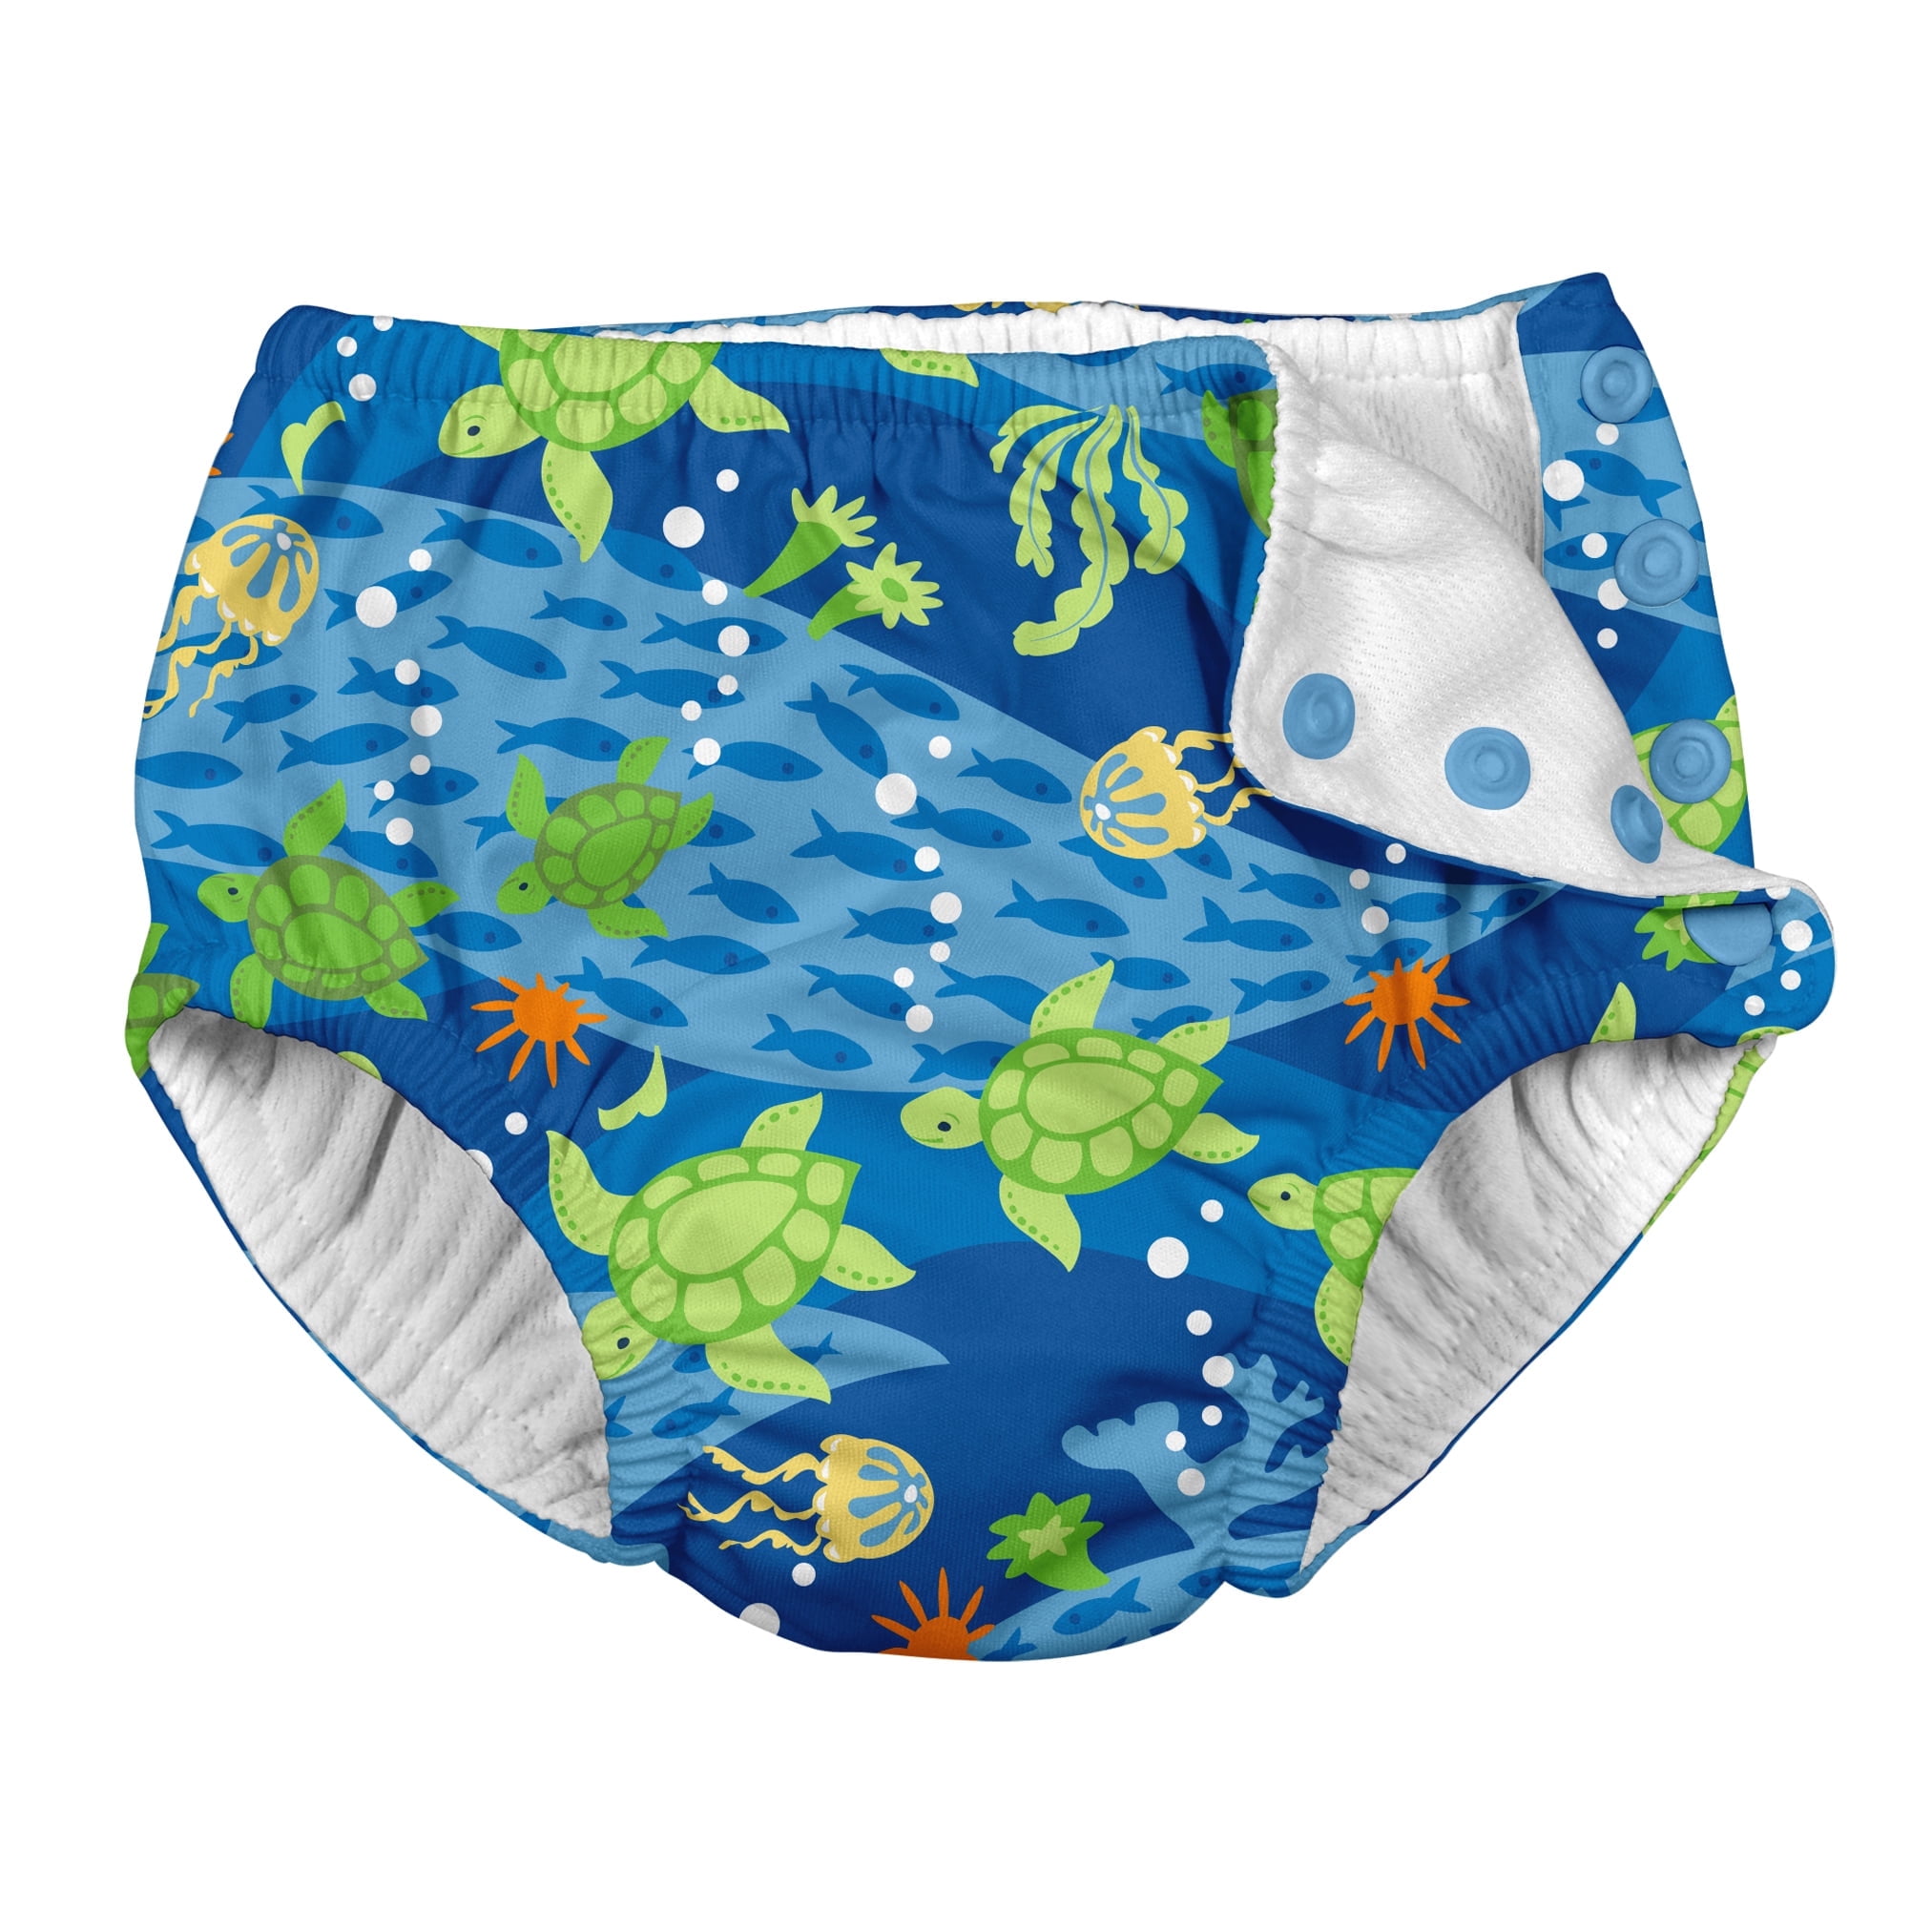 i play. Baby and Toddler Boys Snap Reusable Absorbent Swim Diaper